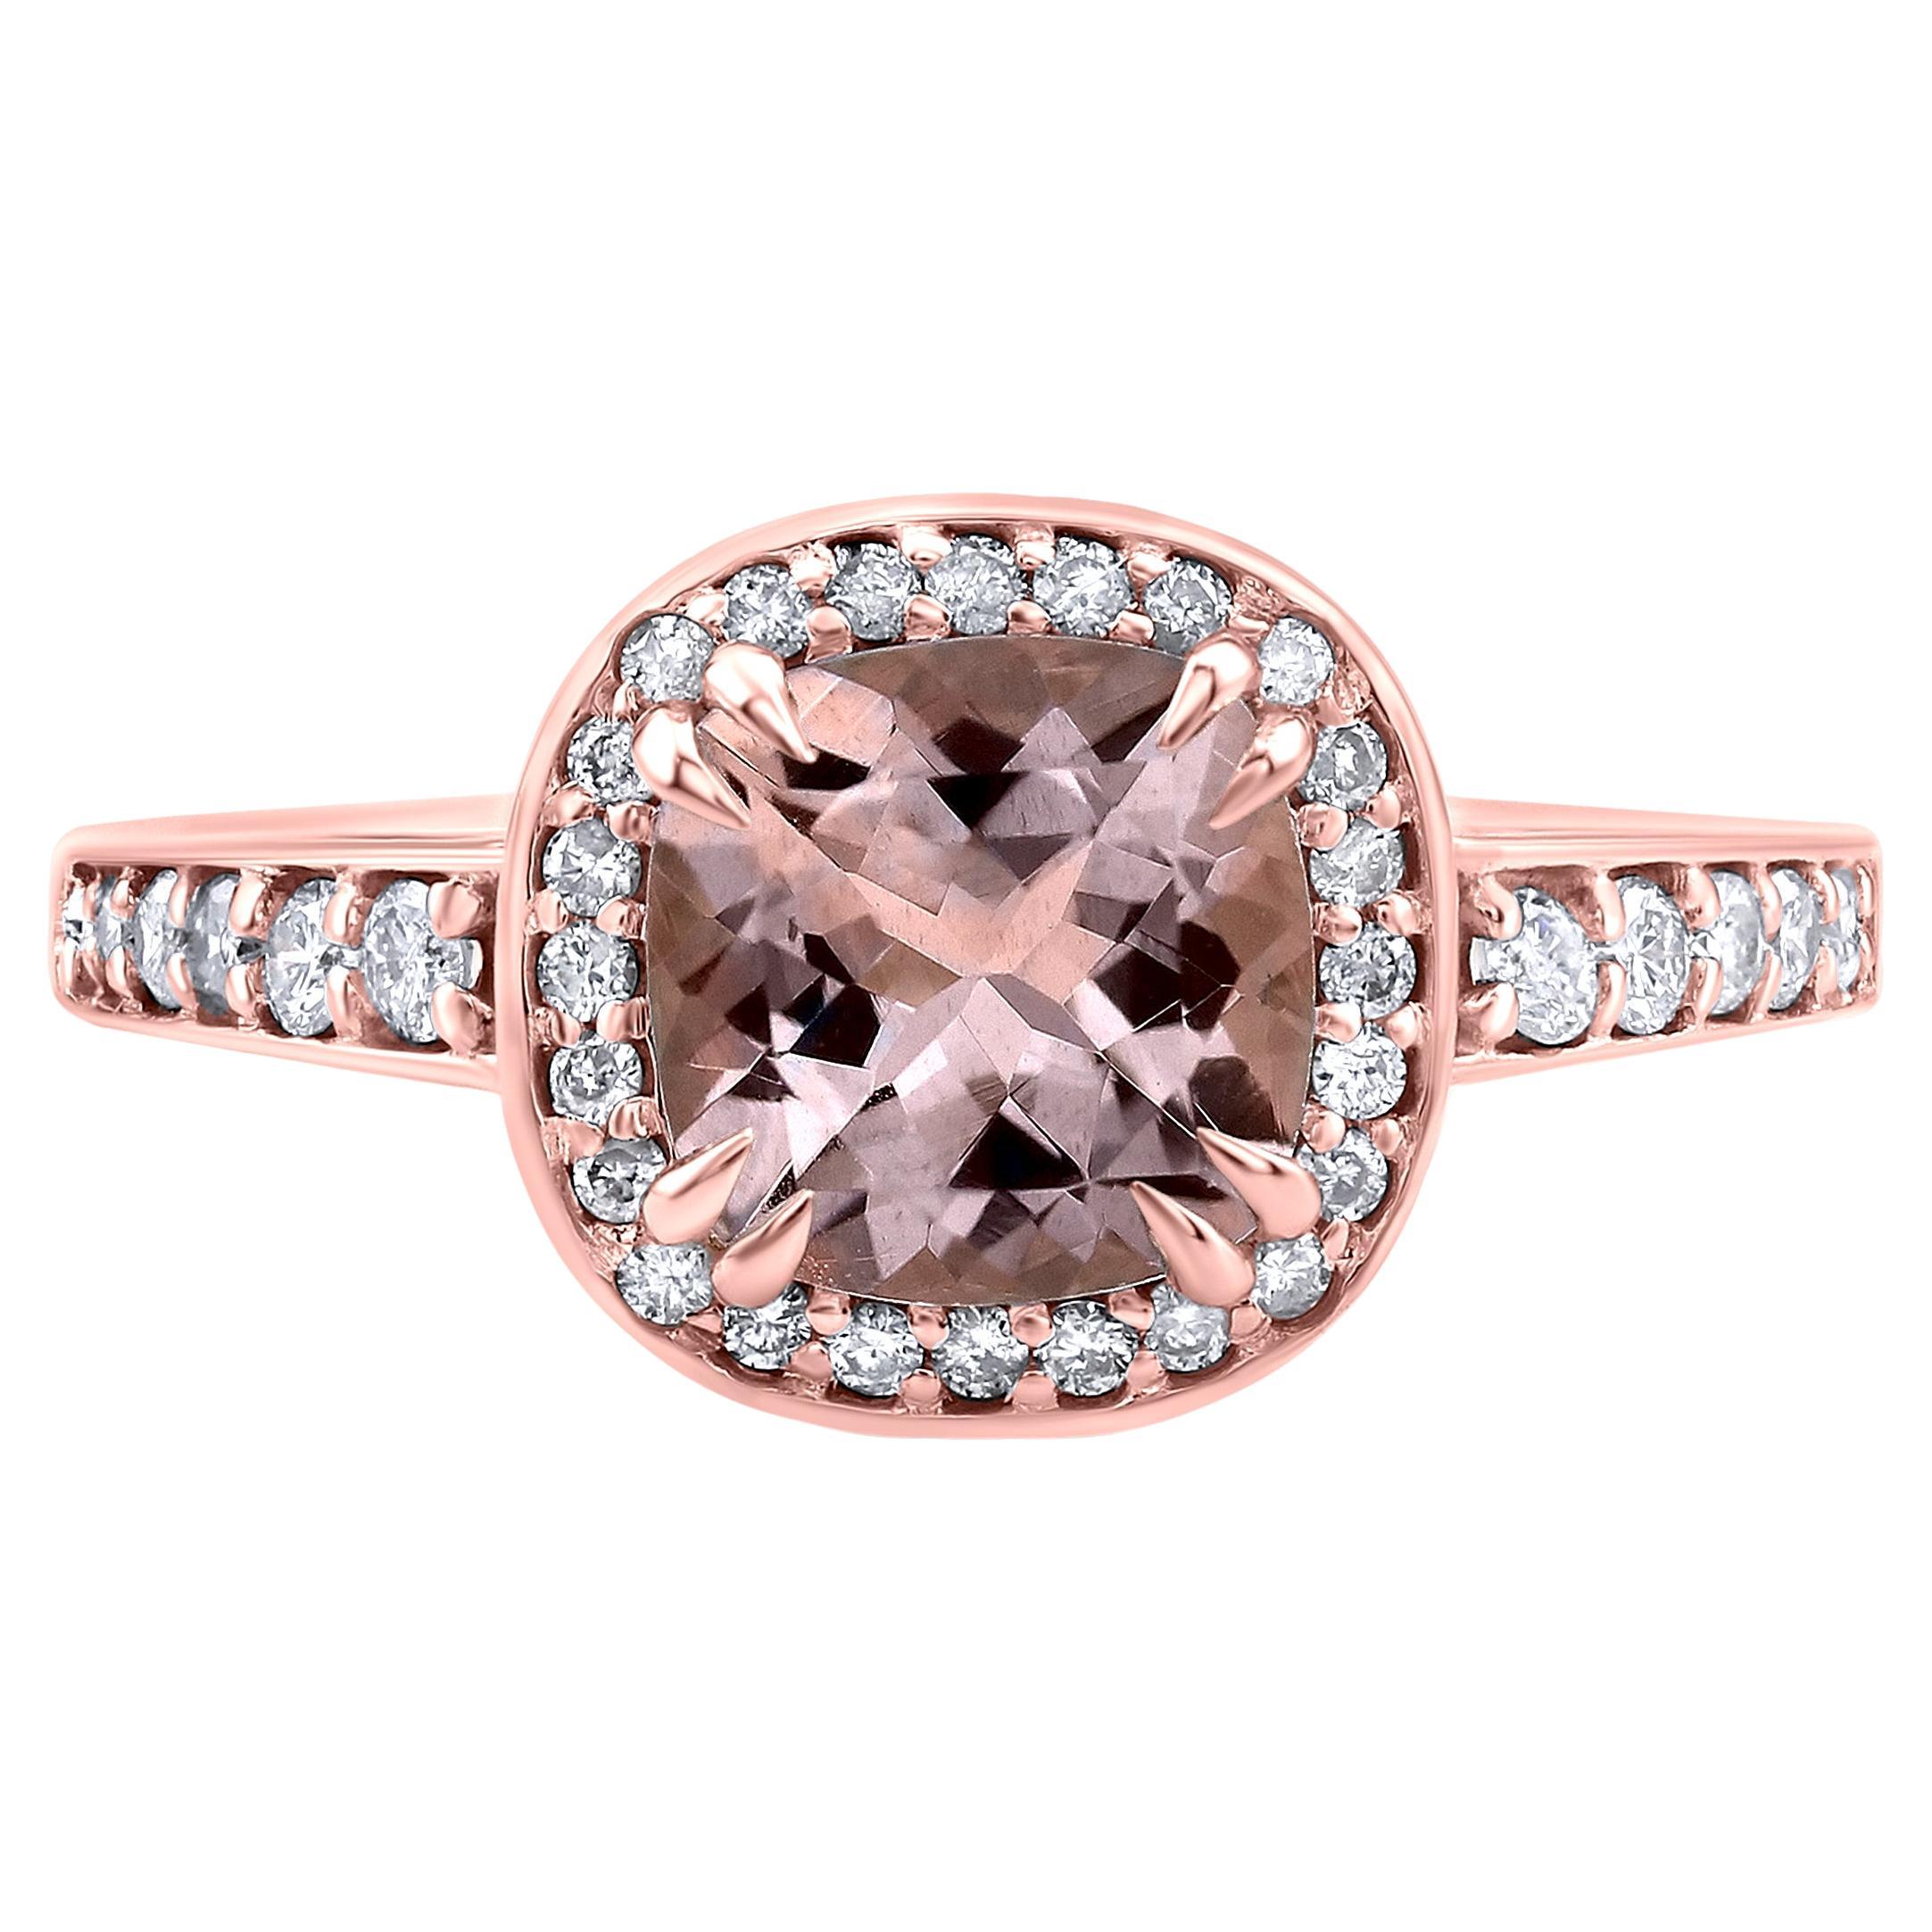 Gemistry 1.4 Carat Cushion Morganite Halo Solitaire Diamond Ring in 14K Gold For Sale